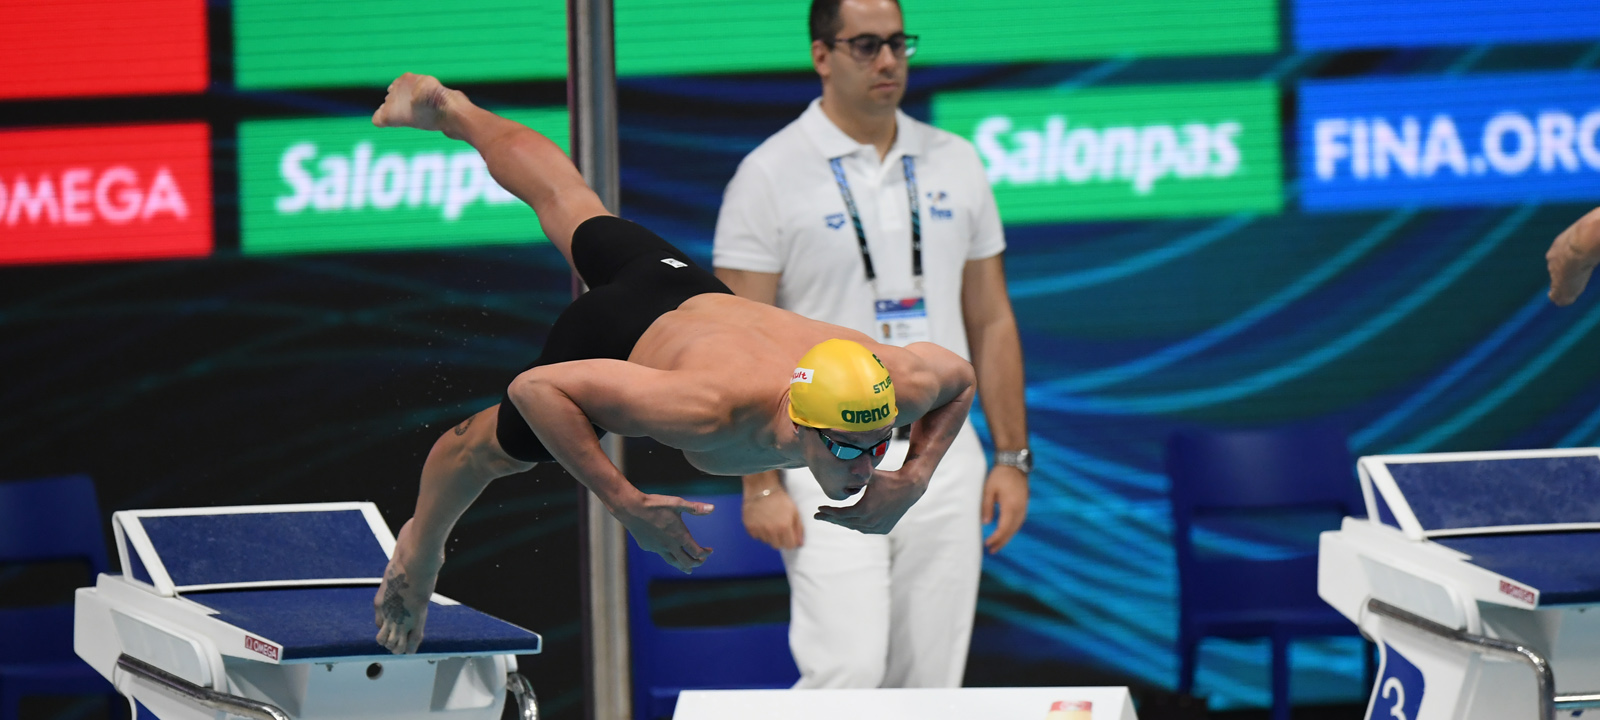 How To Watch The 2022 Duel In The Pool Between the US and Australia (Swimming)